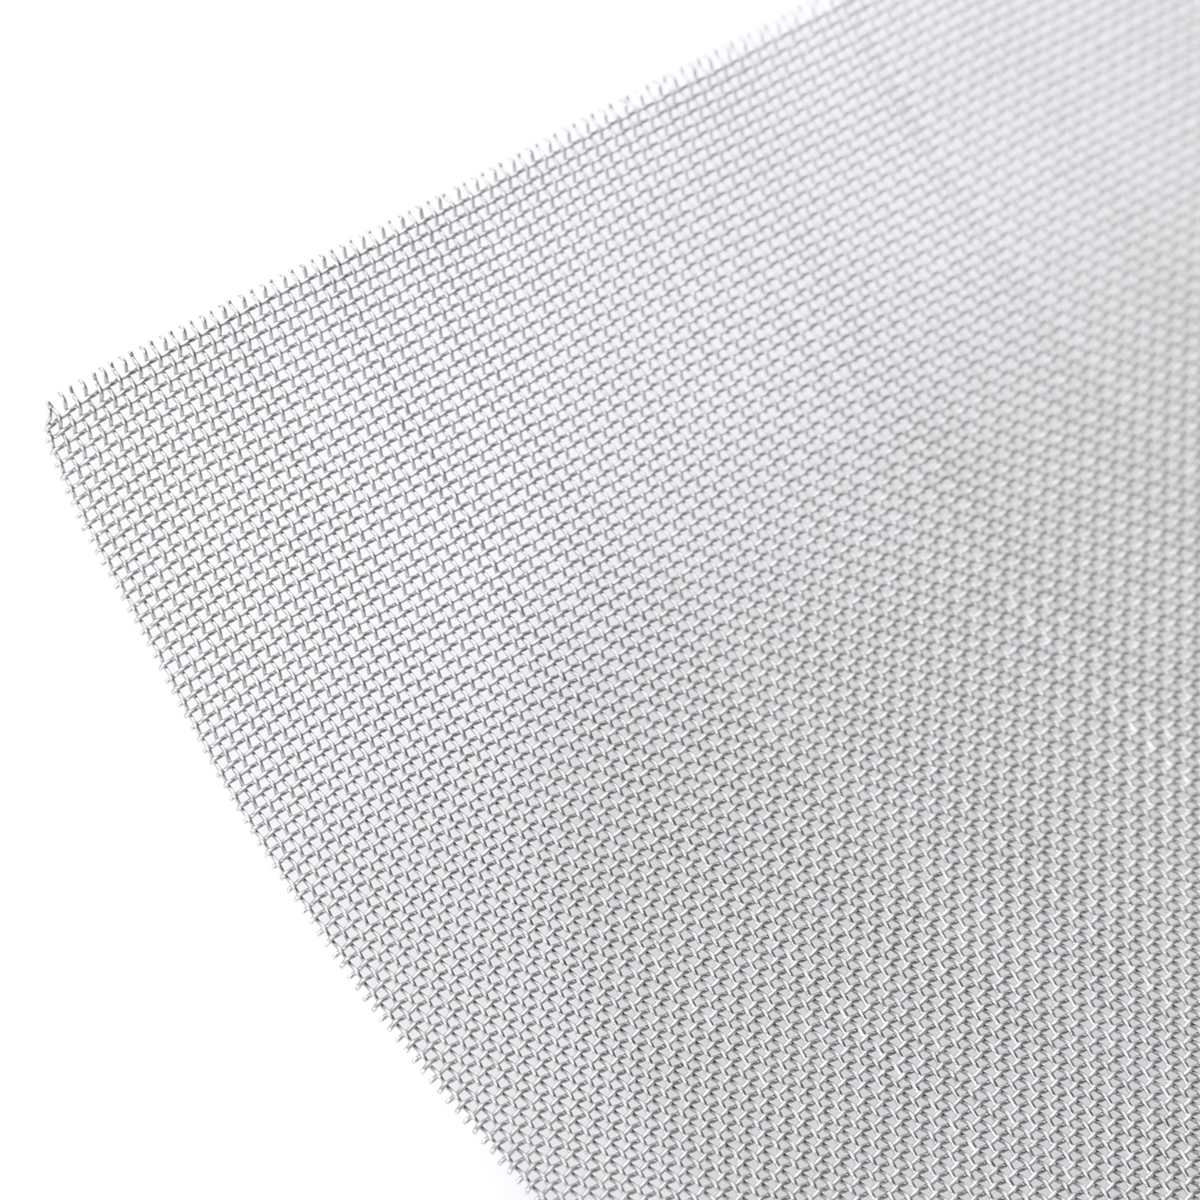 doersupp NEW 40 Mesh / 425 Micron Stainless Steel Filter Filtration Woven Wire Screen Screen Filter 12"X12"